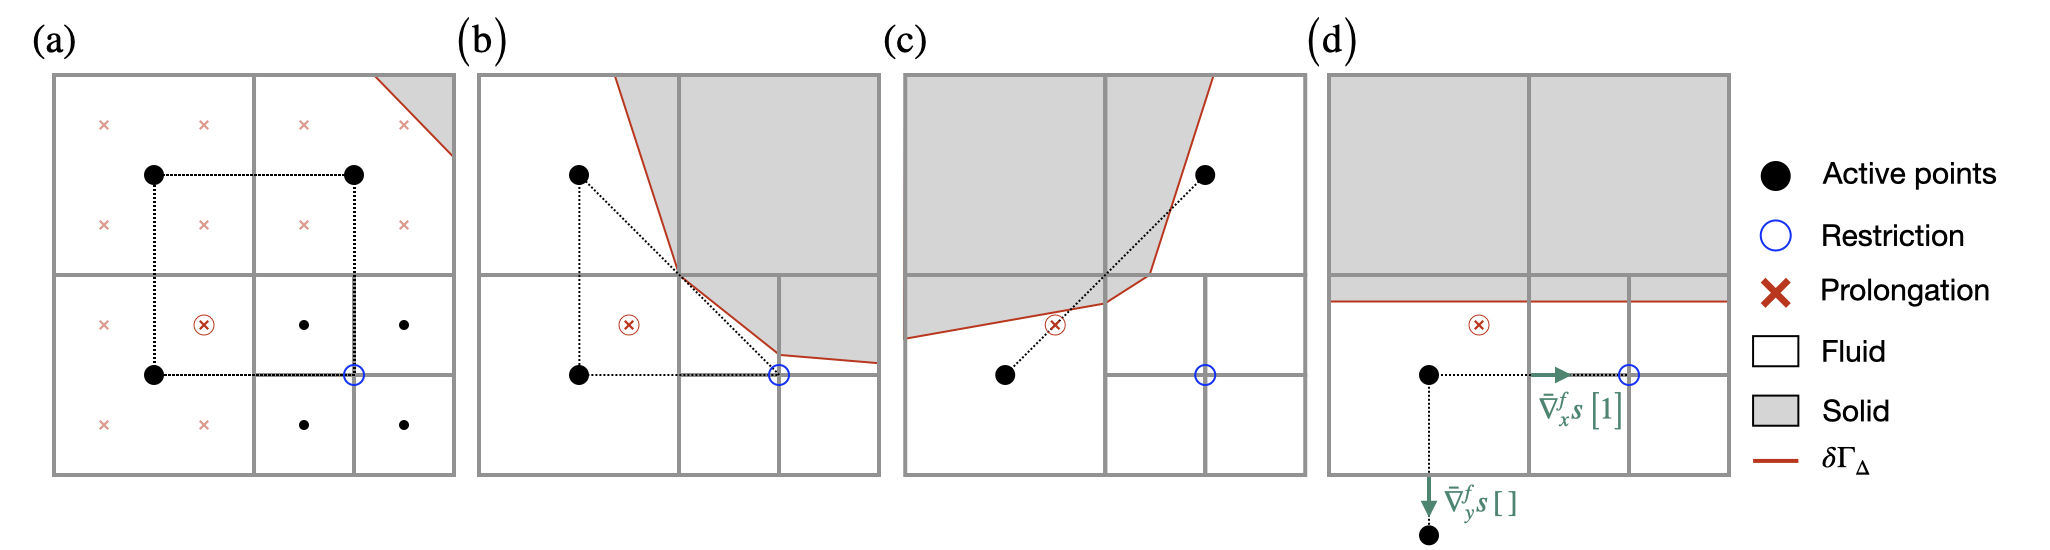 Graphical representation of the prolongation of a cell-centered scalar on a 2D grid.